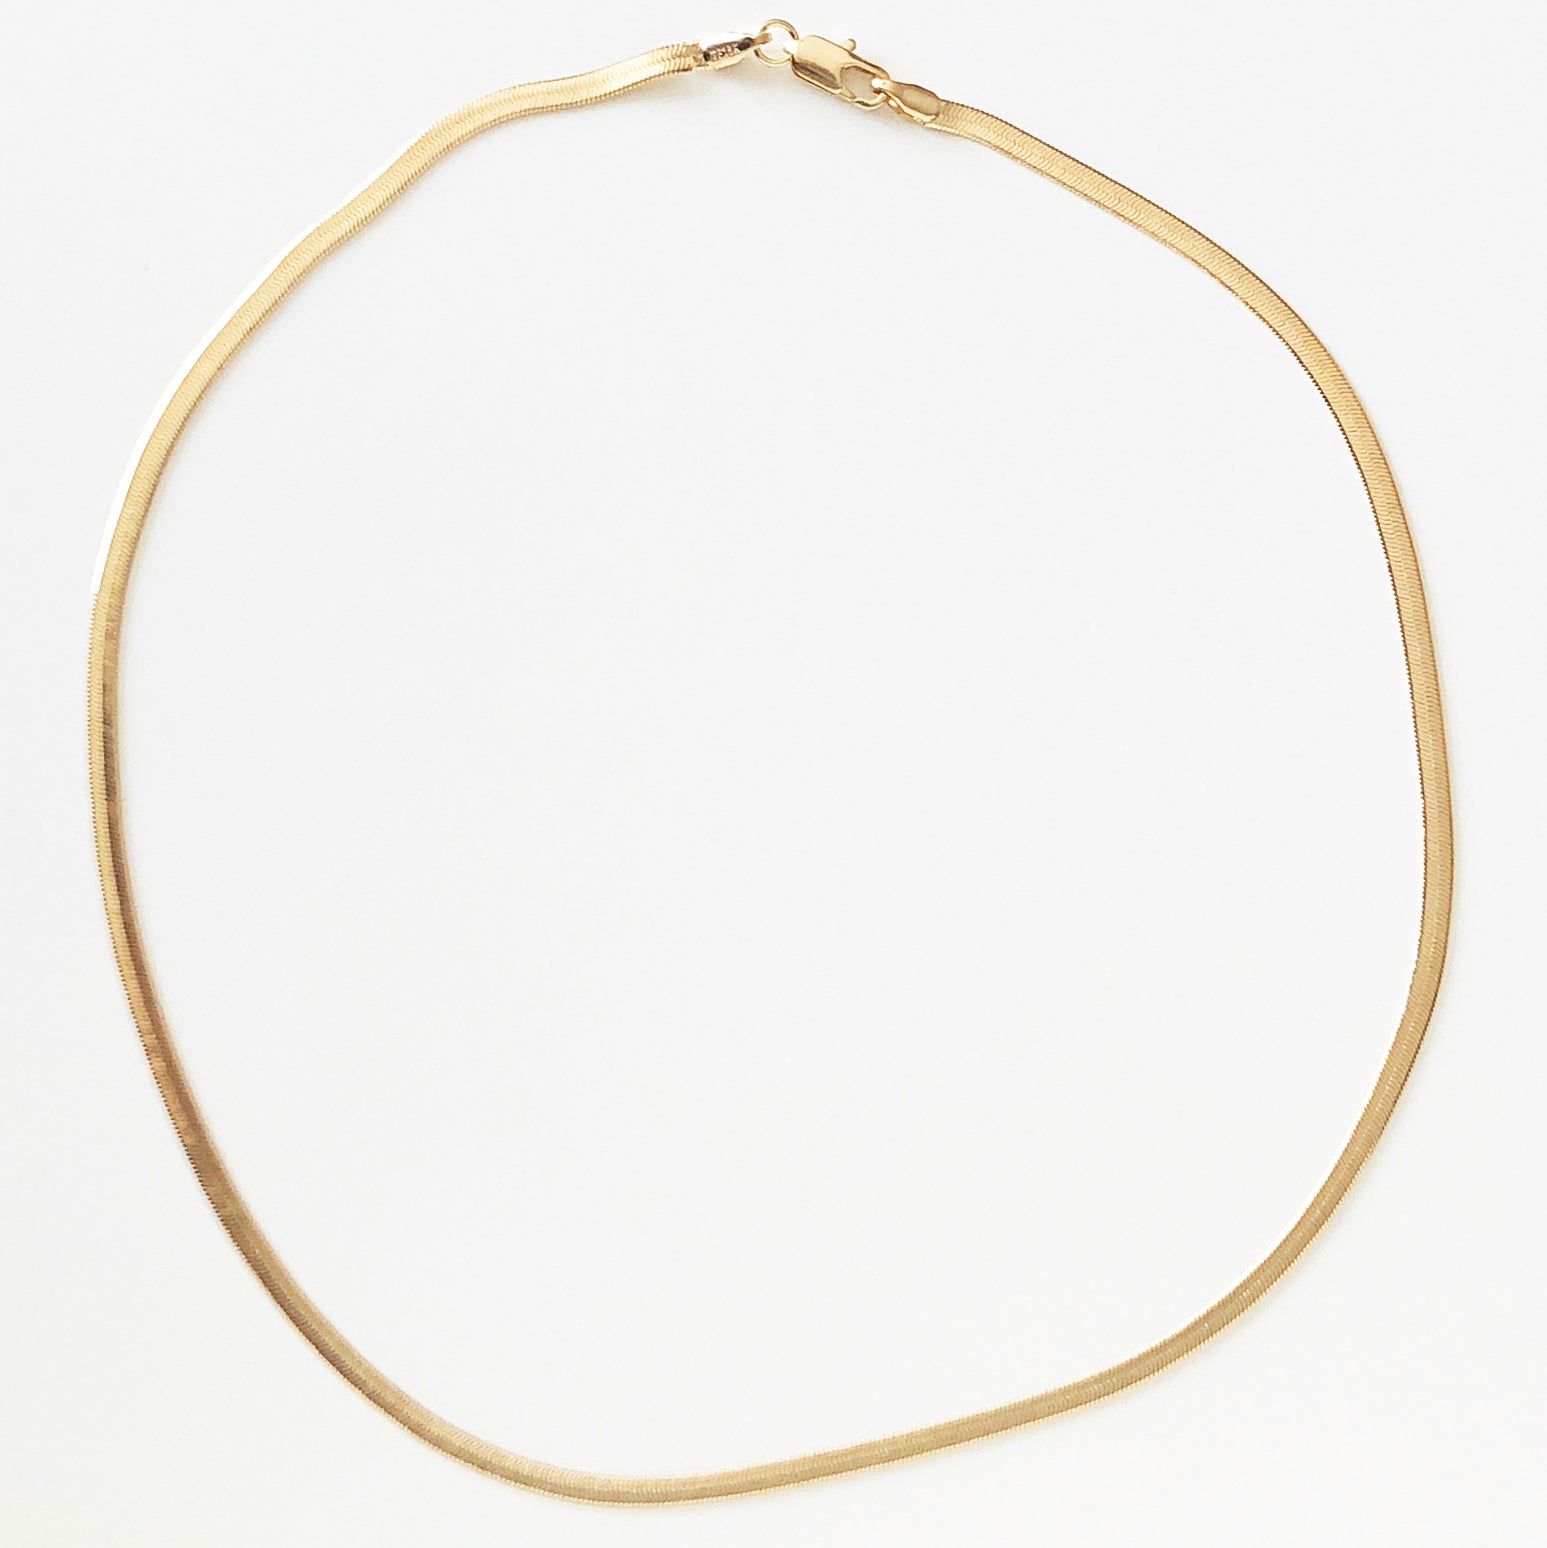 18k gold-filled 4mm classic snake chain necklace